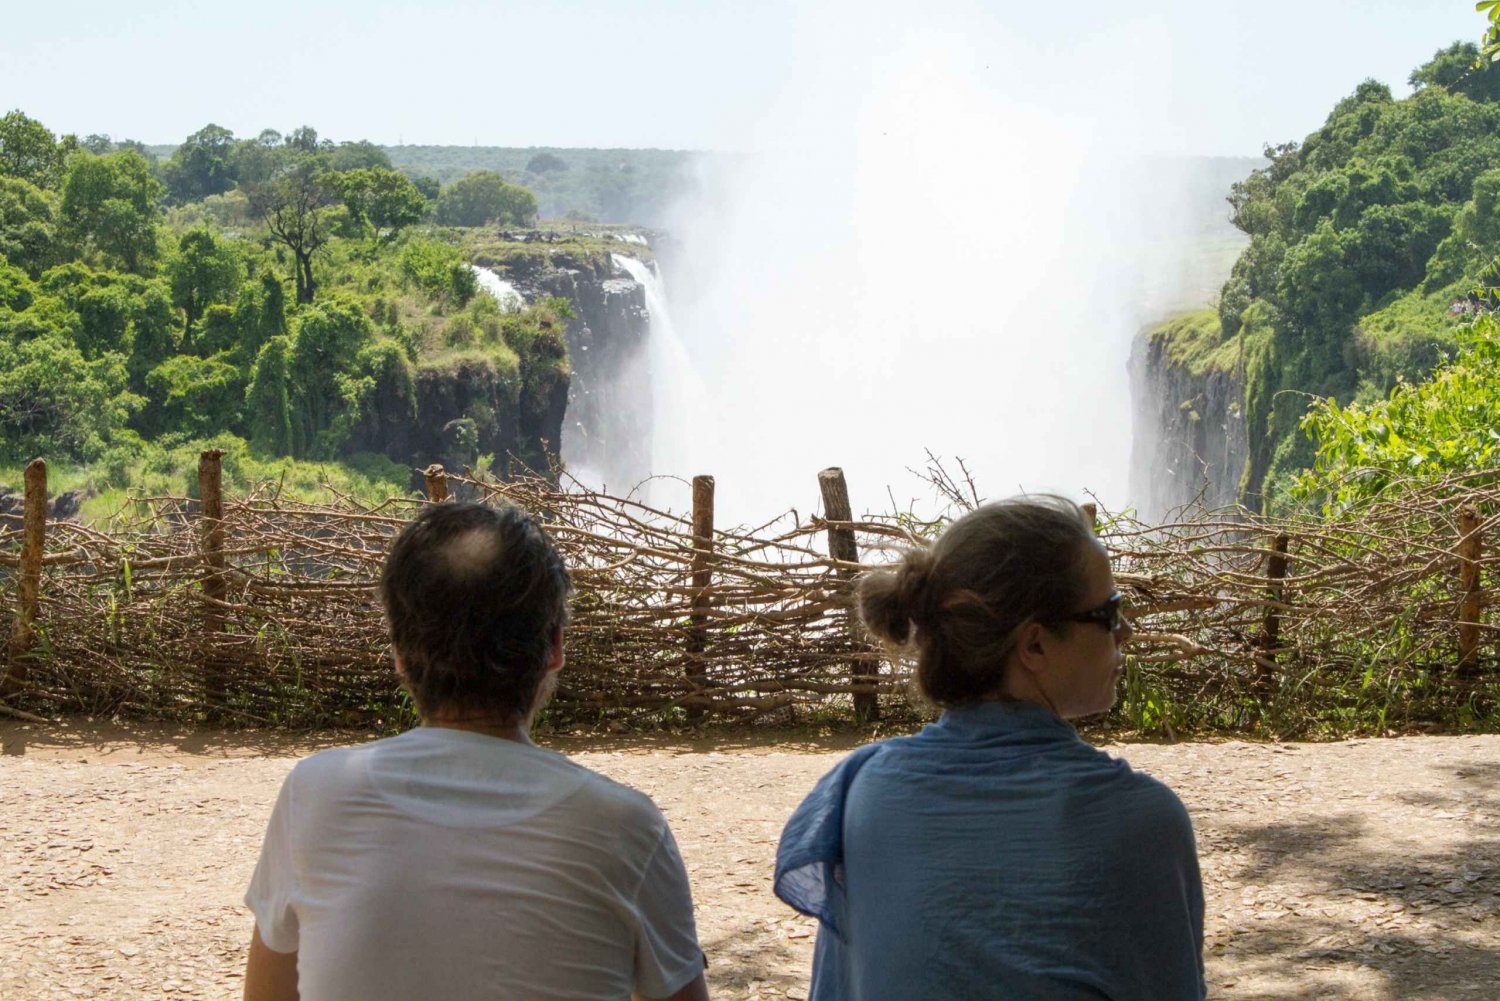 Guided Tour of the Mighty Victoria Falls